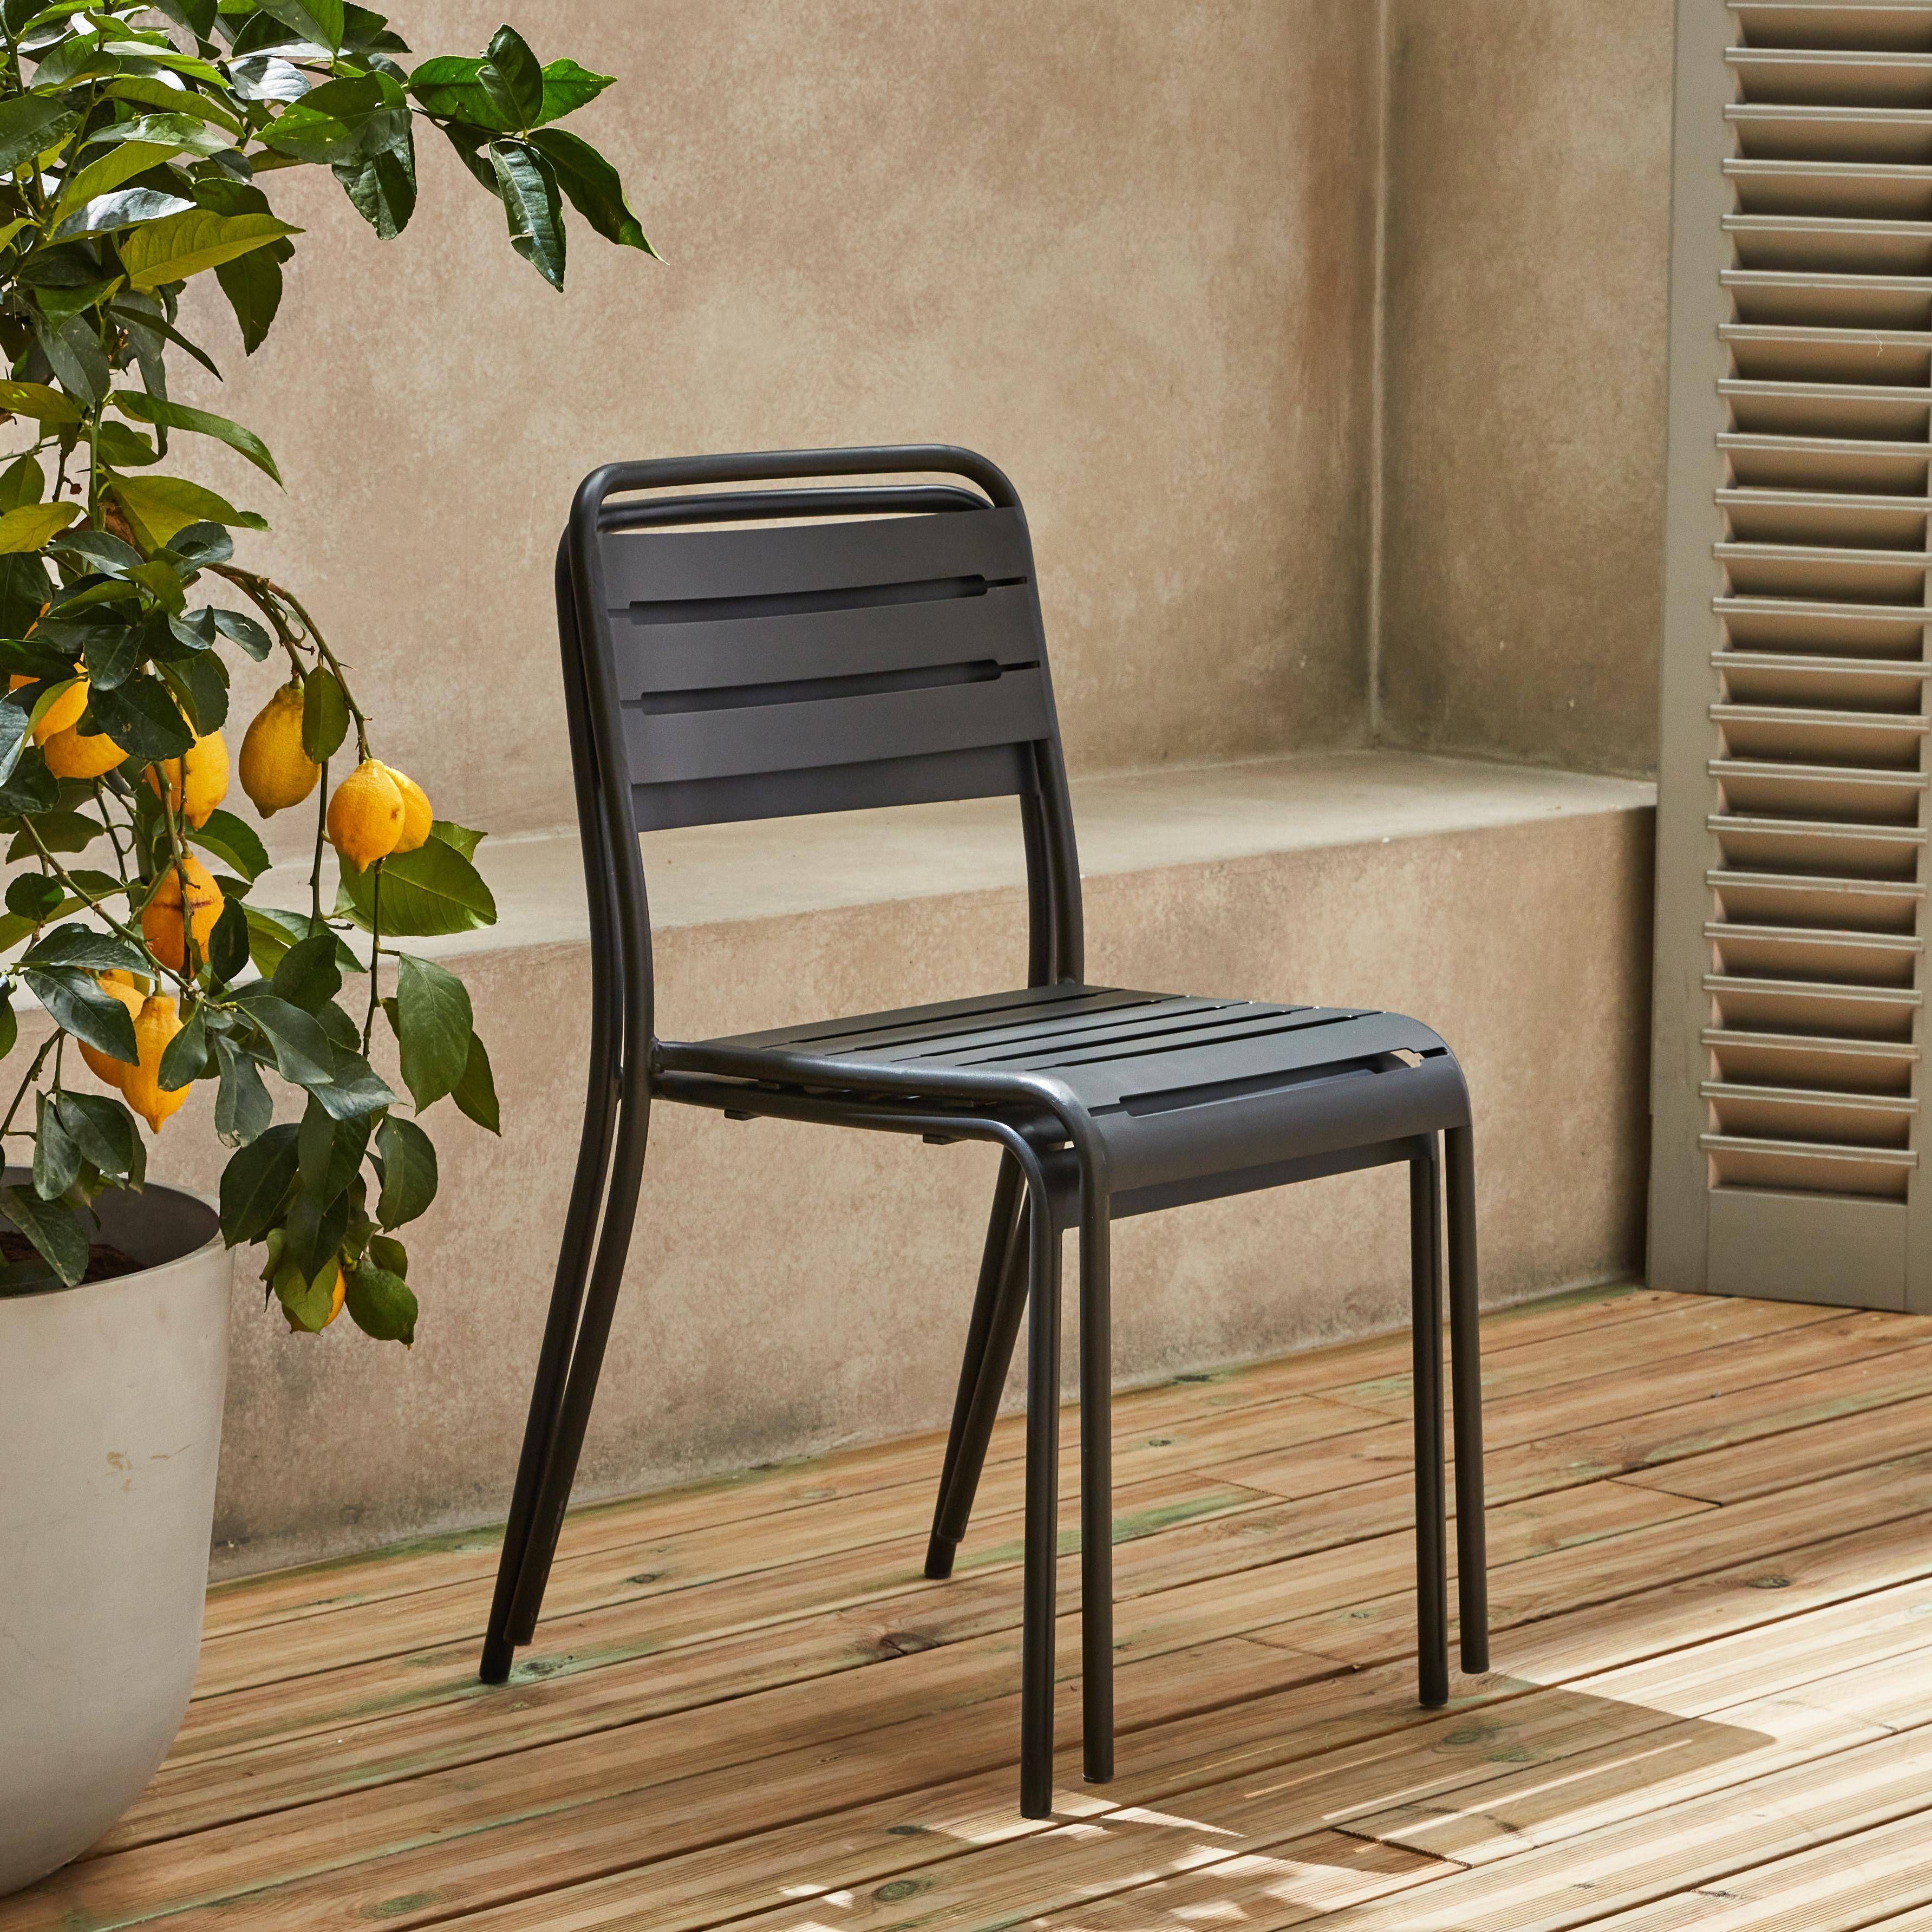 Pair of bistro steel garden chairs, stackable, W44xD52xH79cm, Anthracite Photo3